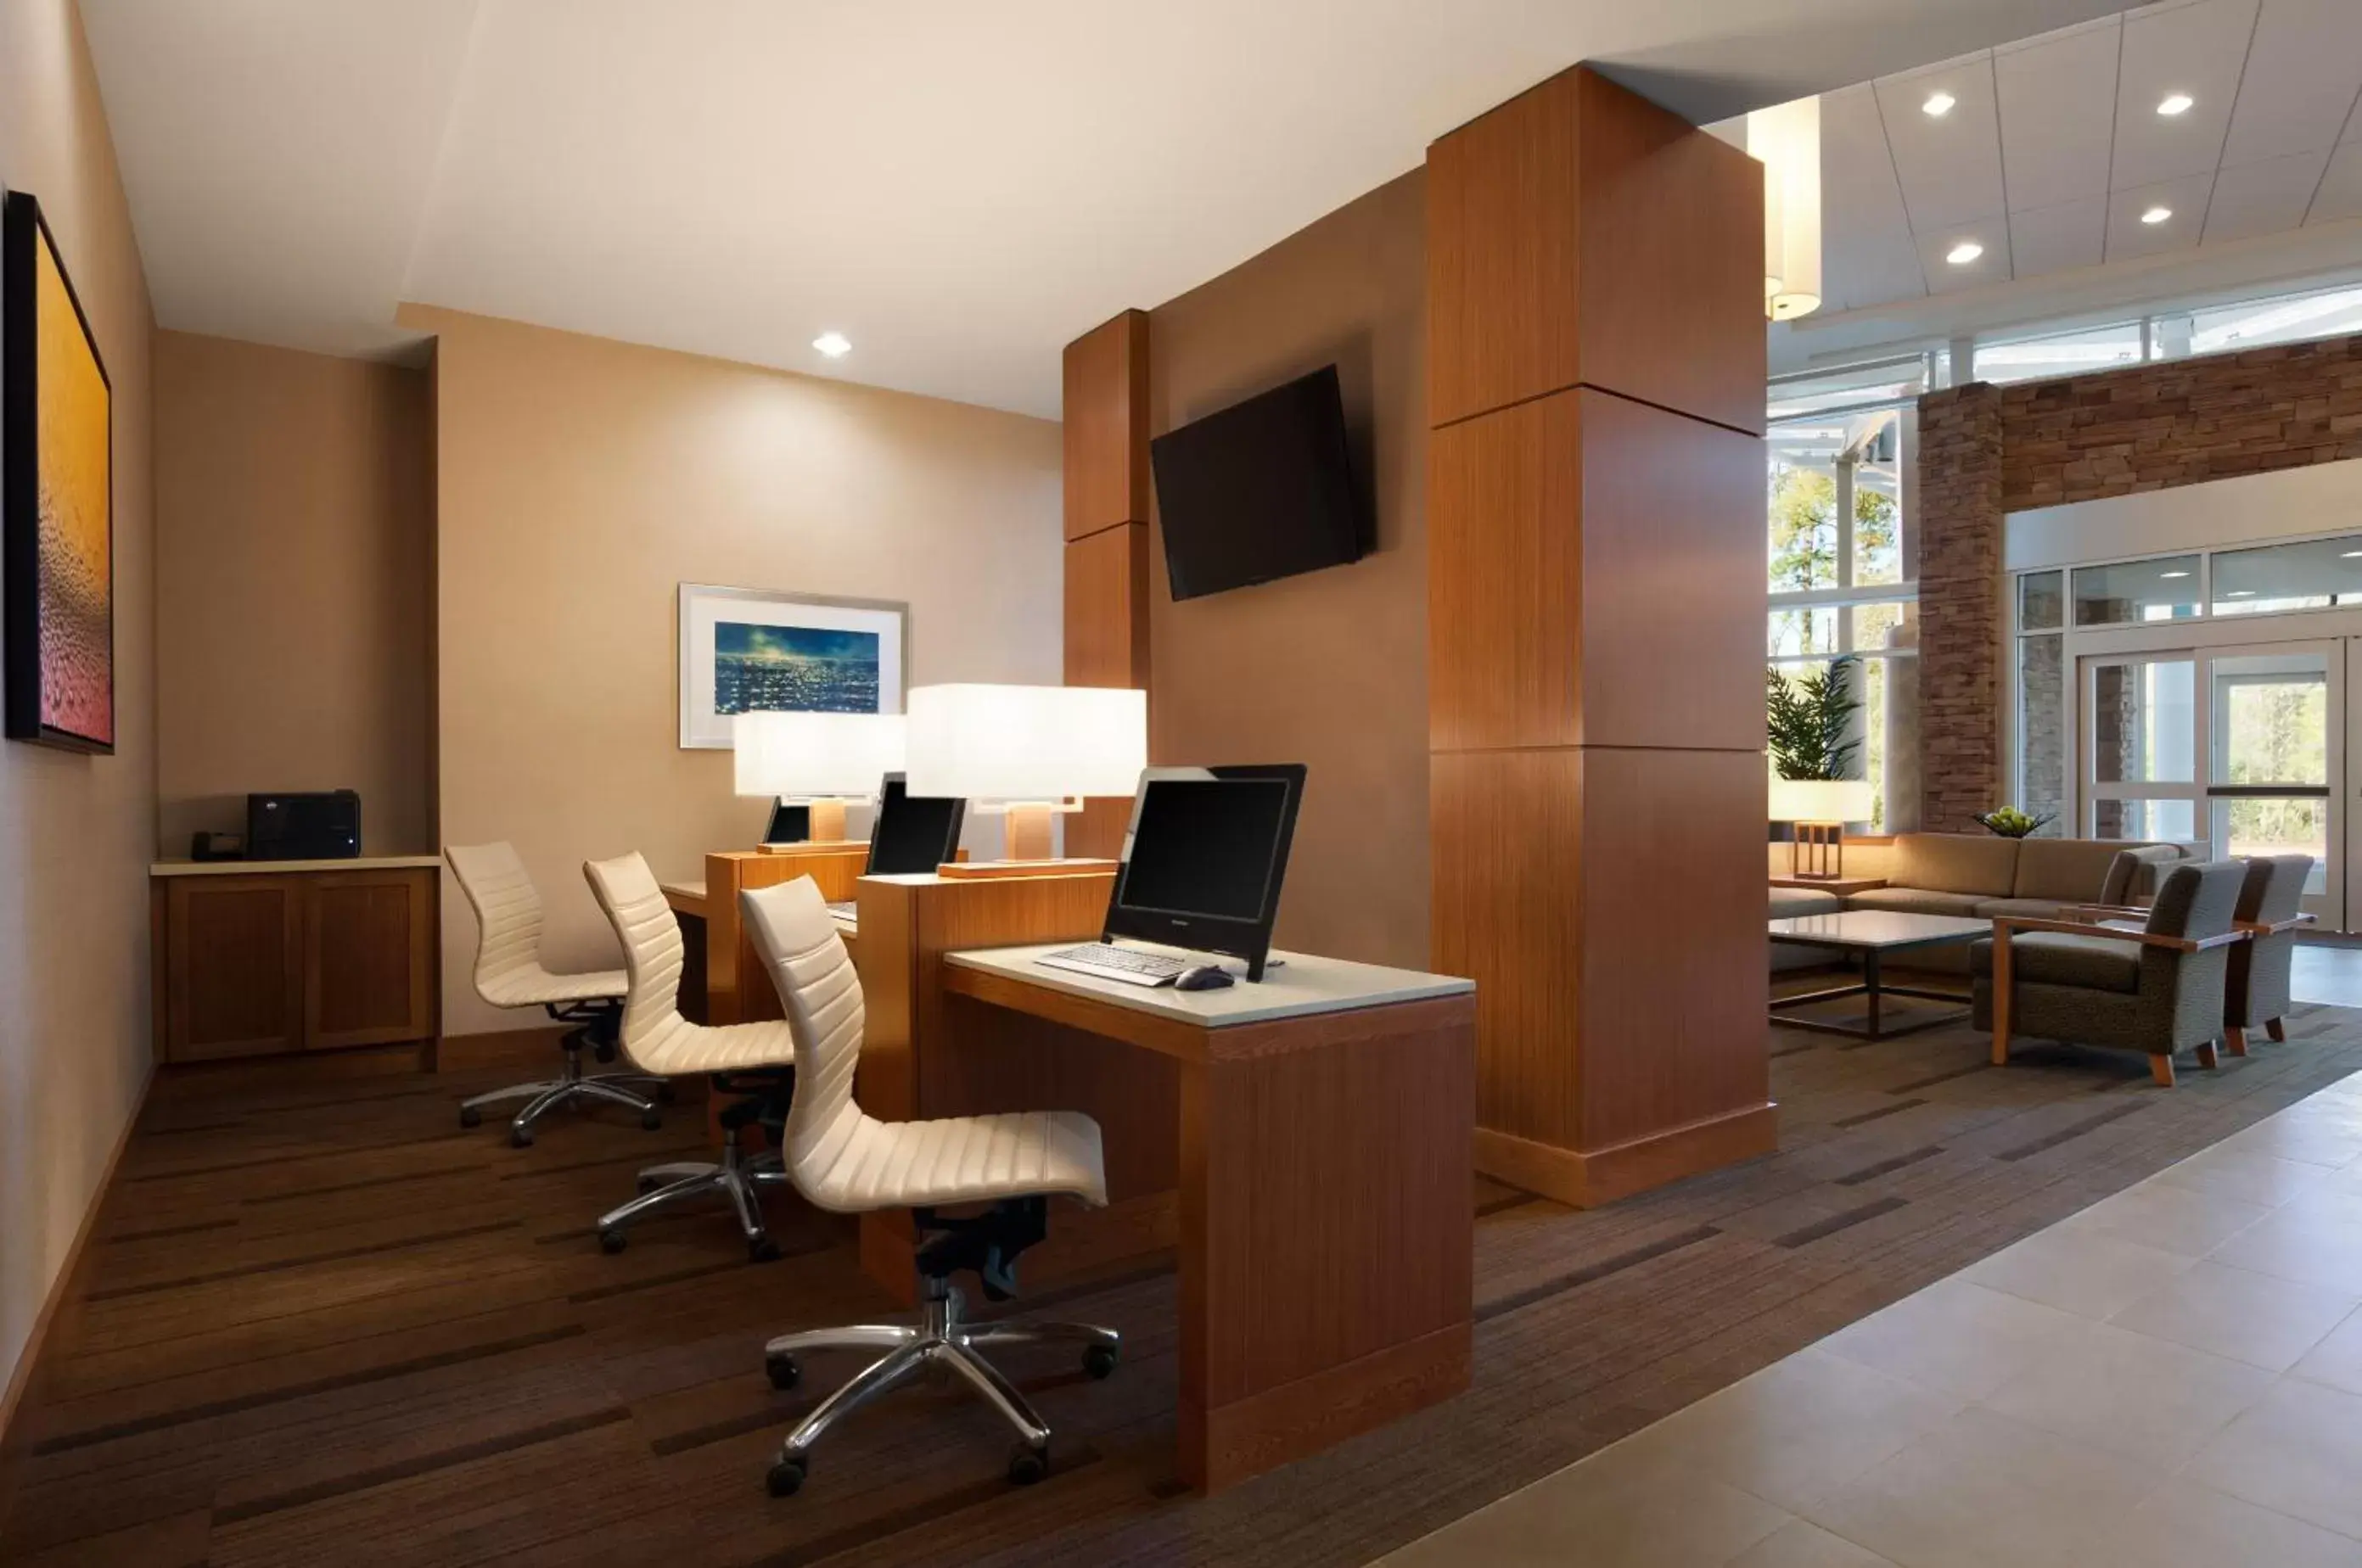 Business facilities in Hyatt Place Houston/The Woodlands